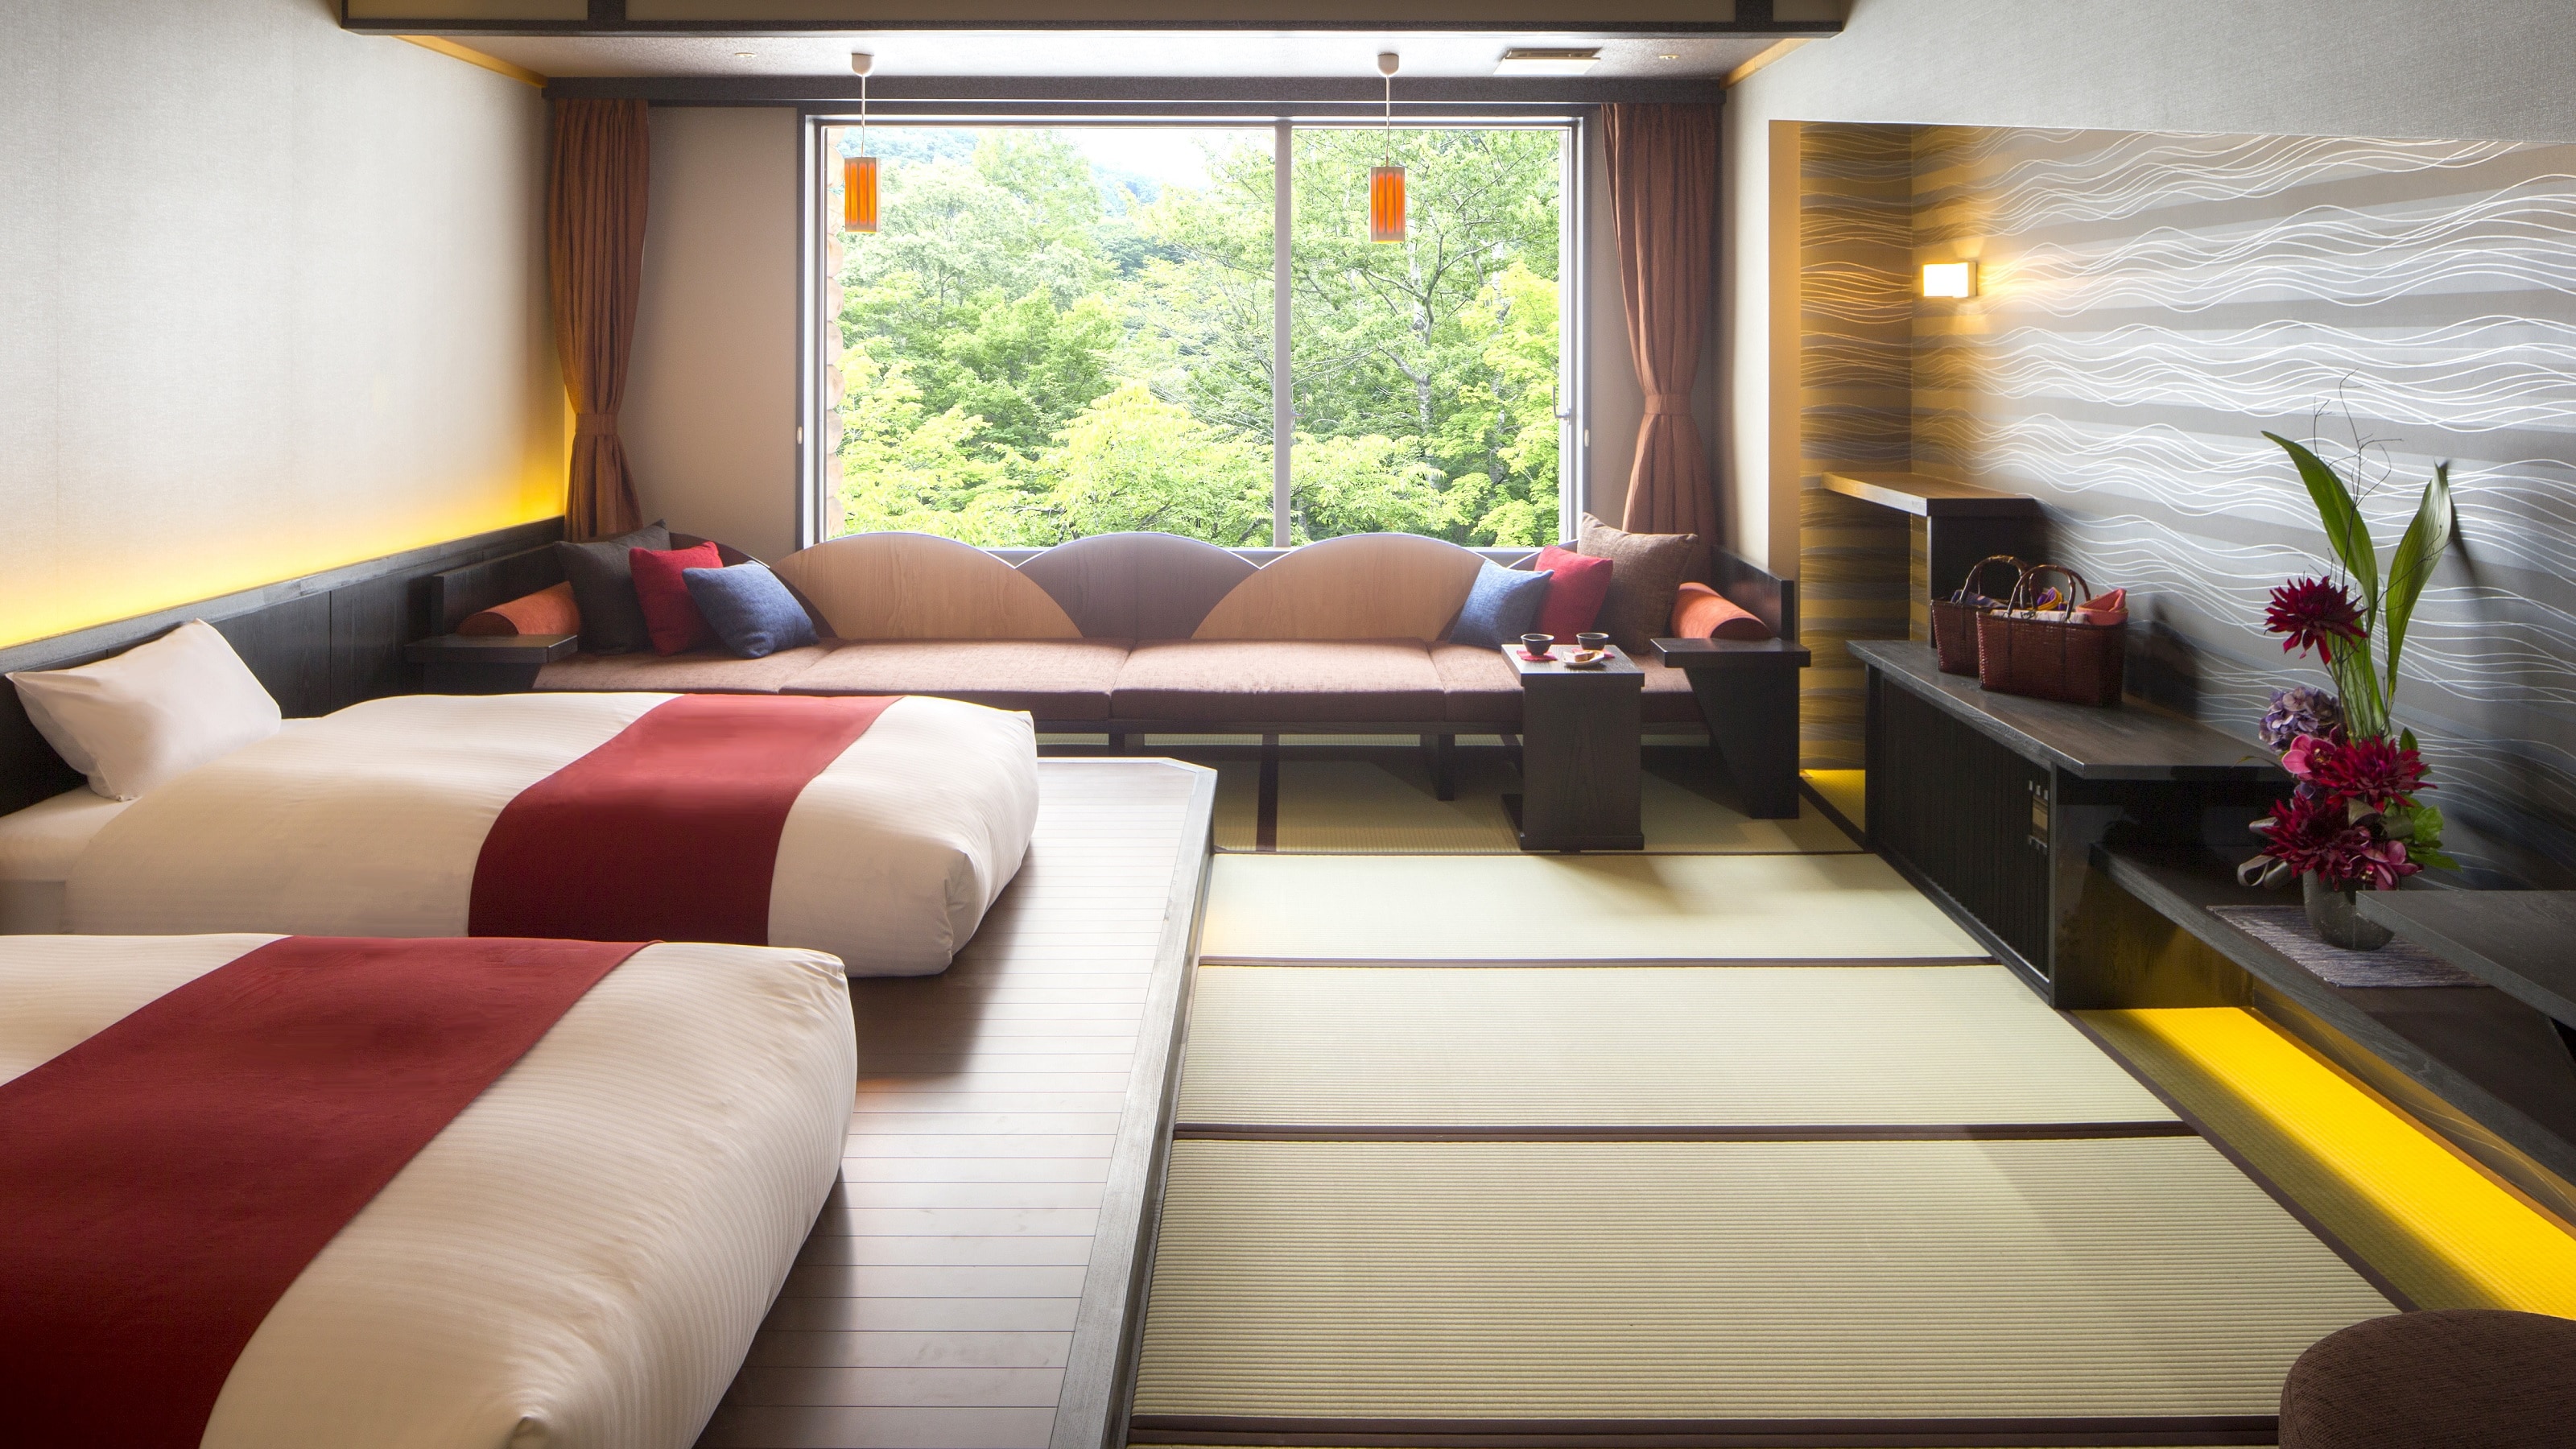 [Japanese-style room]